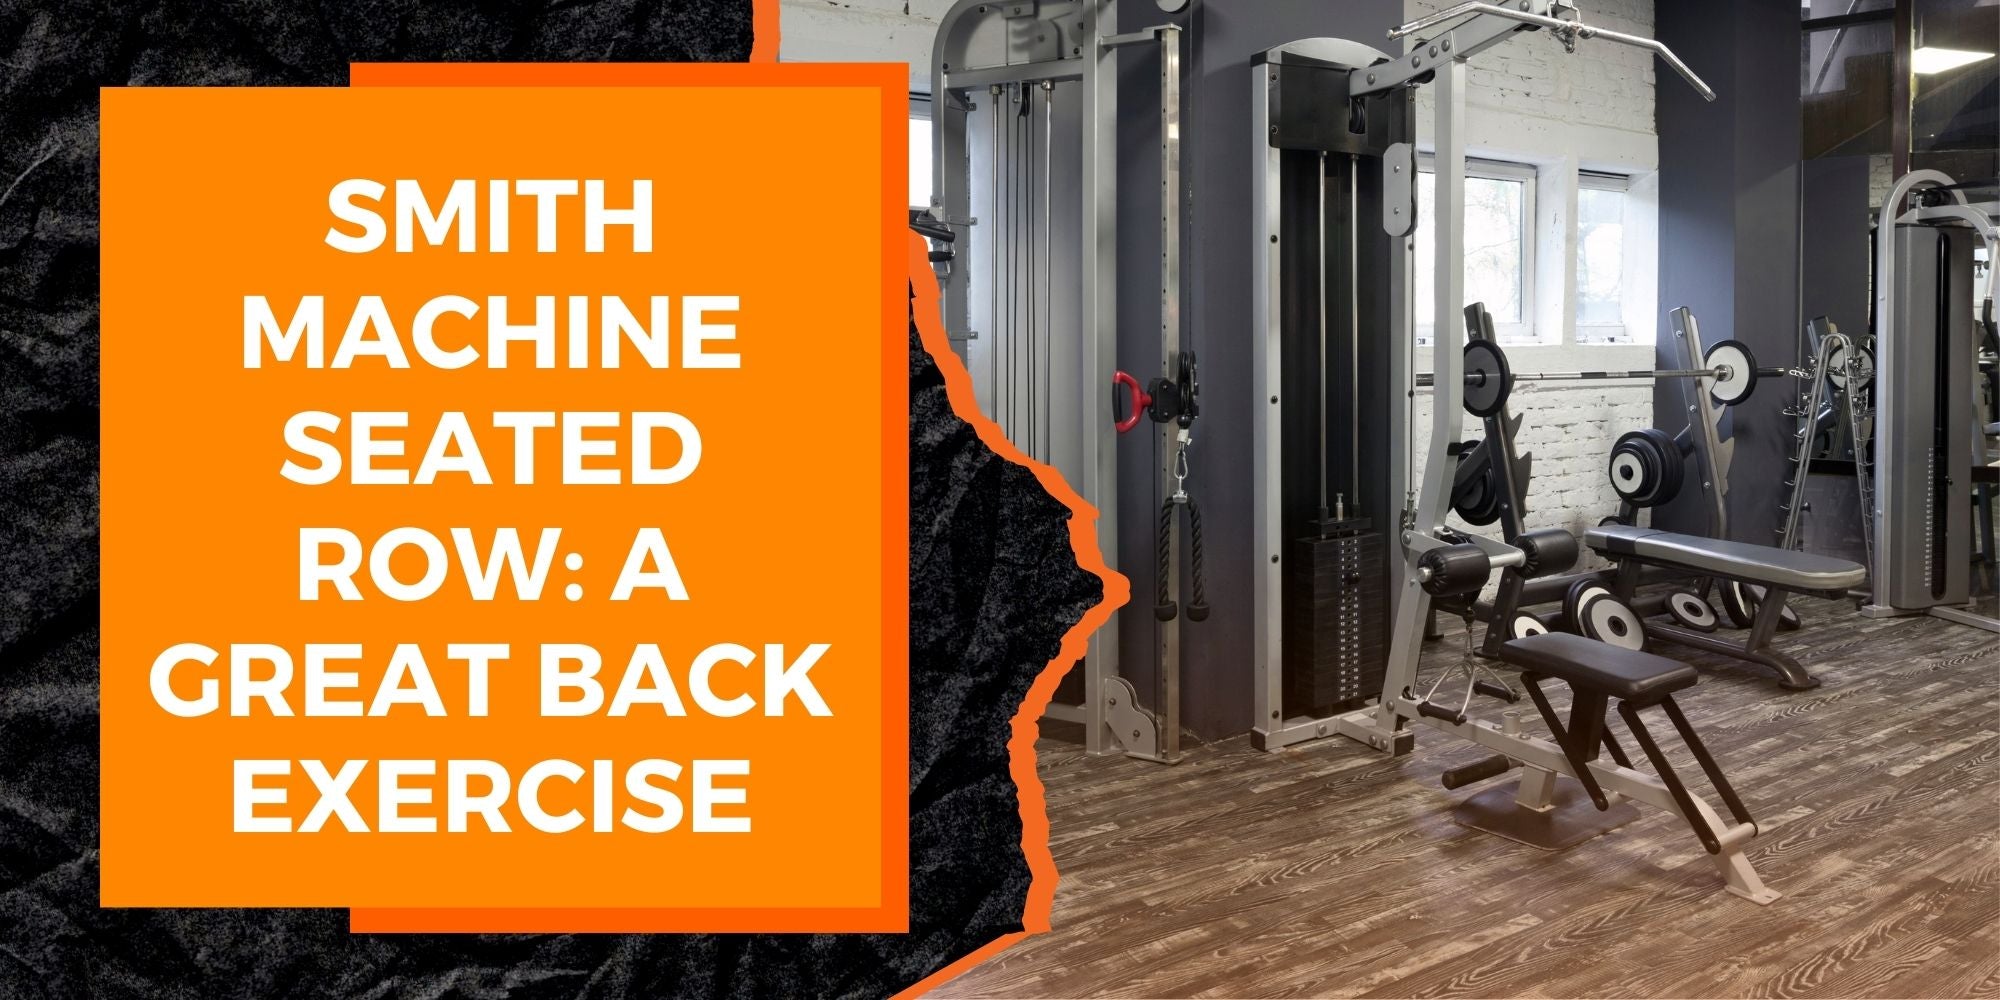 Smith Machine Seated Row: A Great Back Exercise